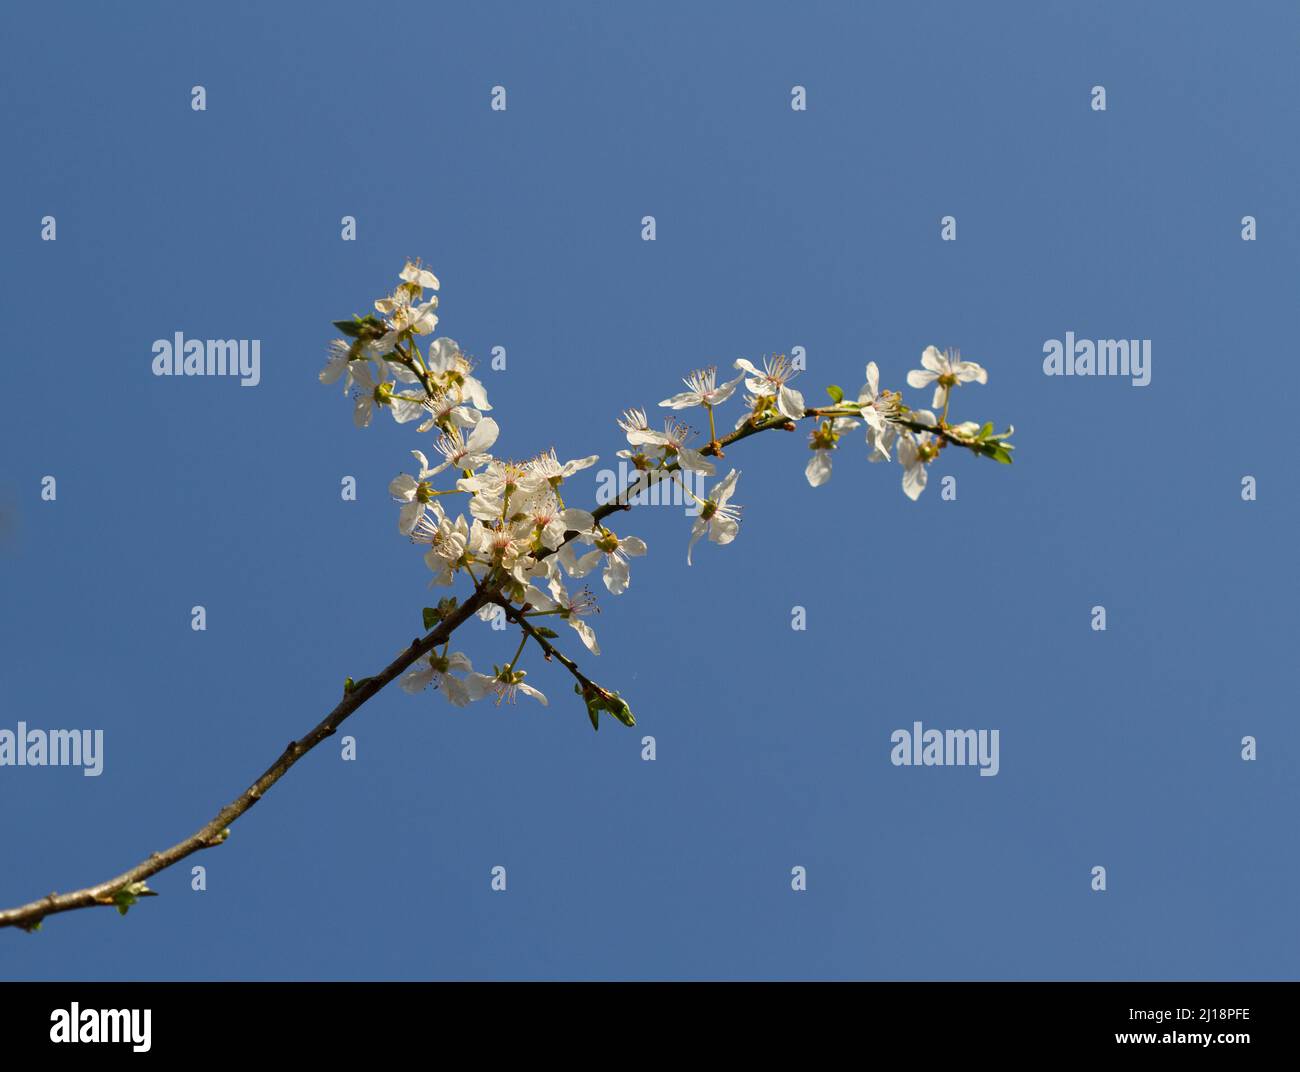 Blooming Cherry plum against a blue sky Stock Photo